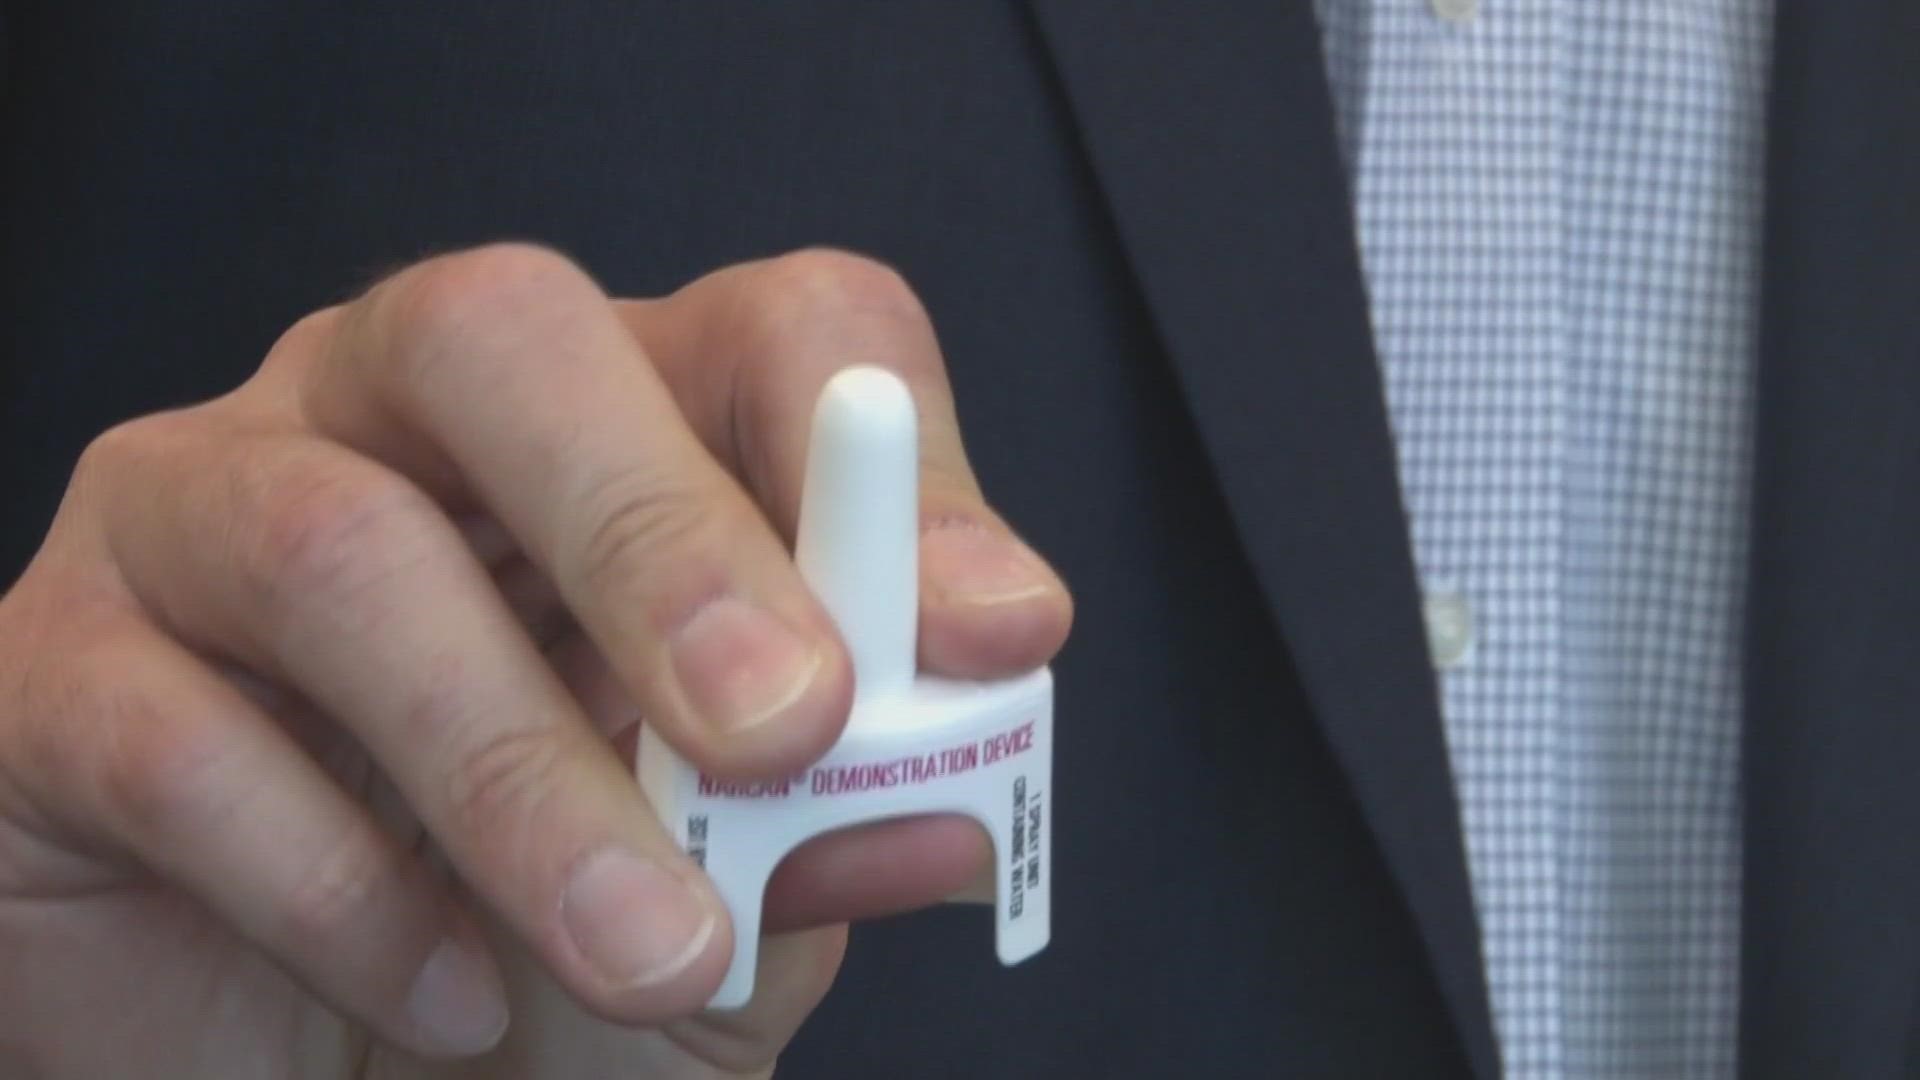 In 2022, the Metro Drug Coalition distributed 16,004 Narcan kits to people, upon request.